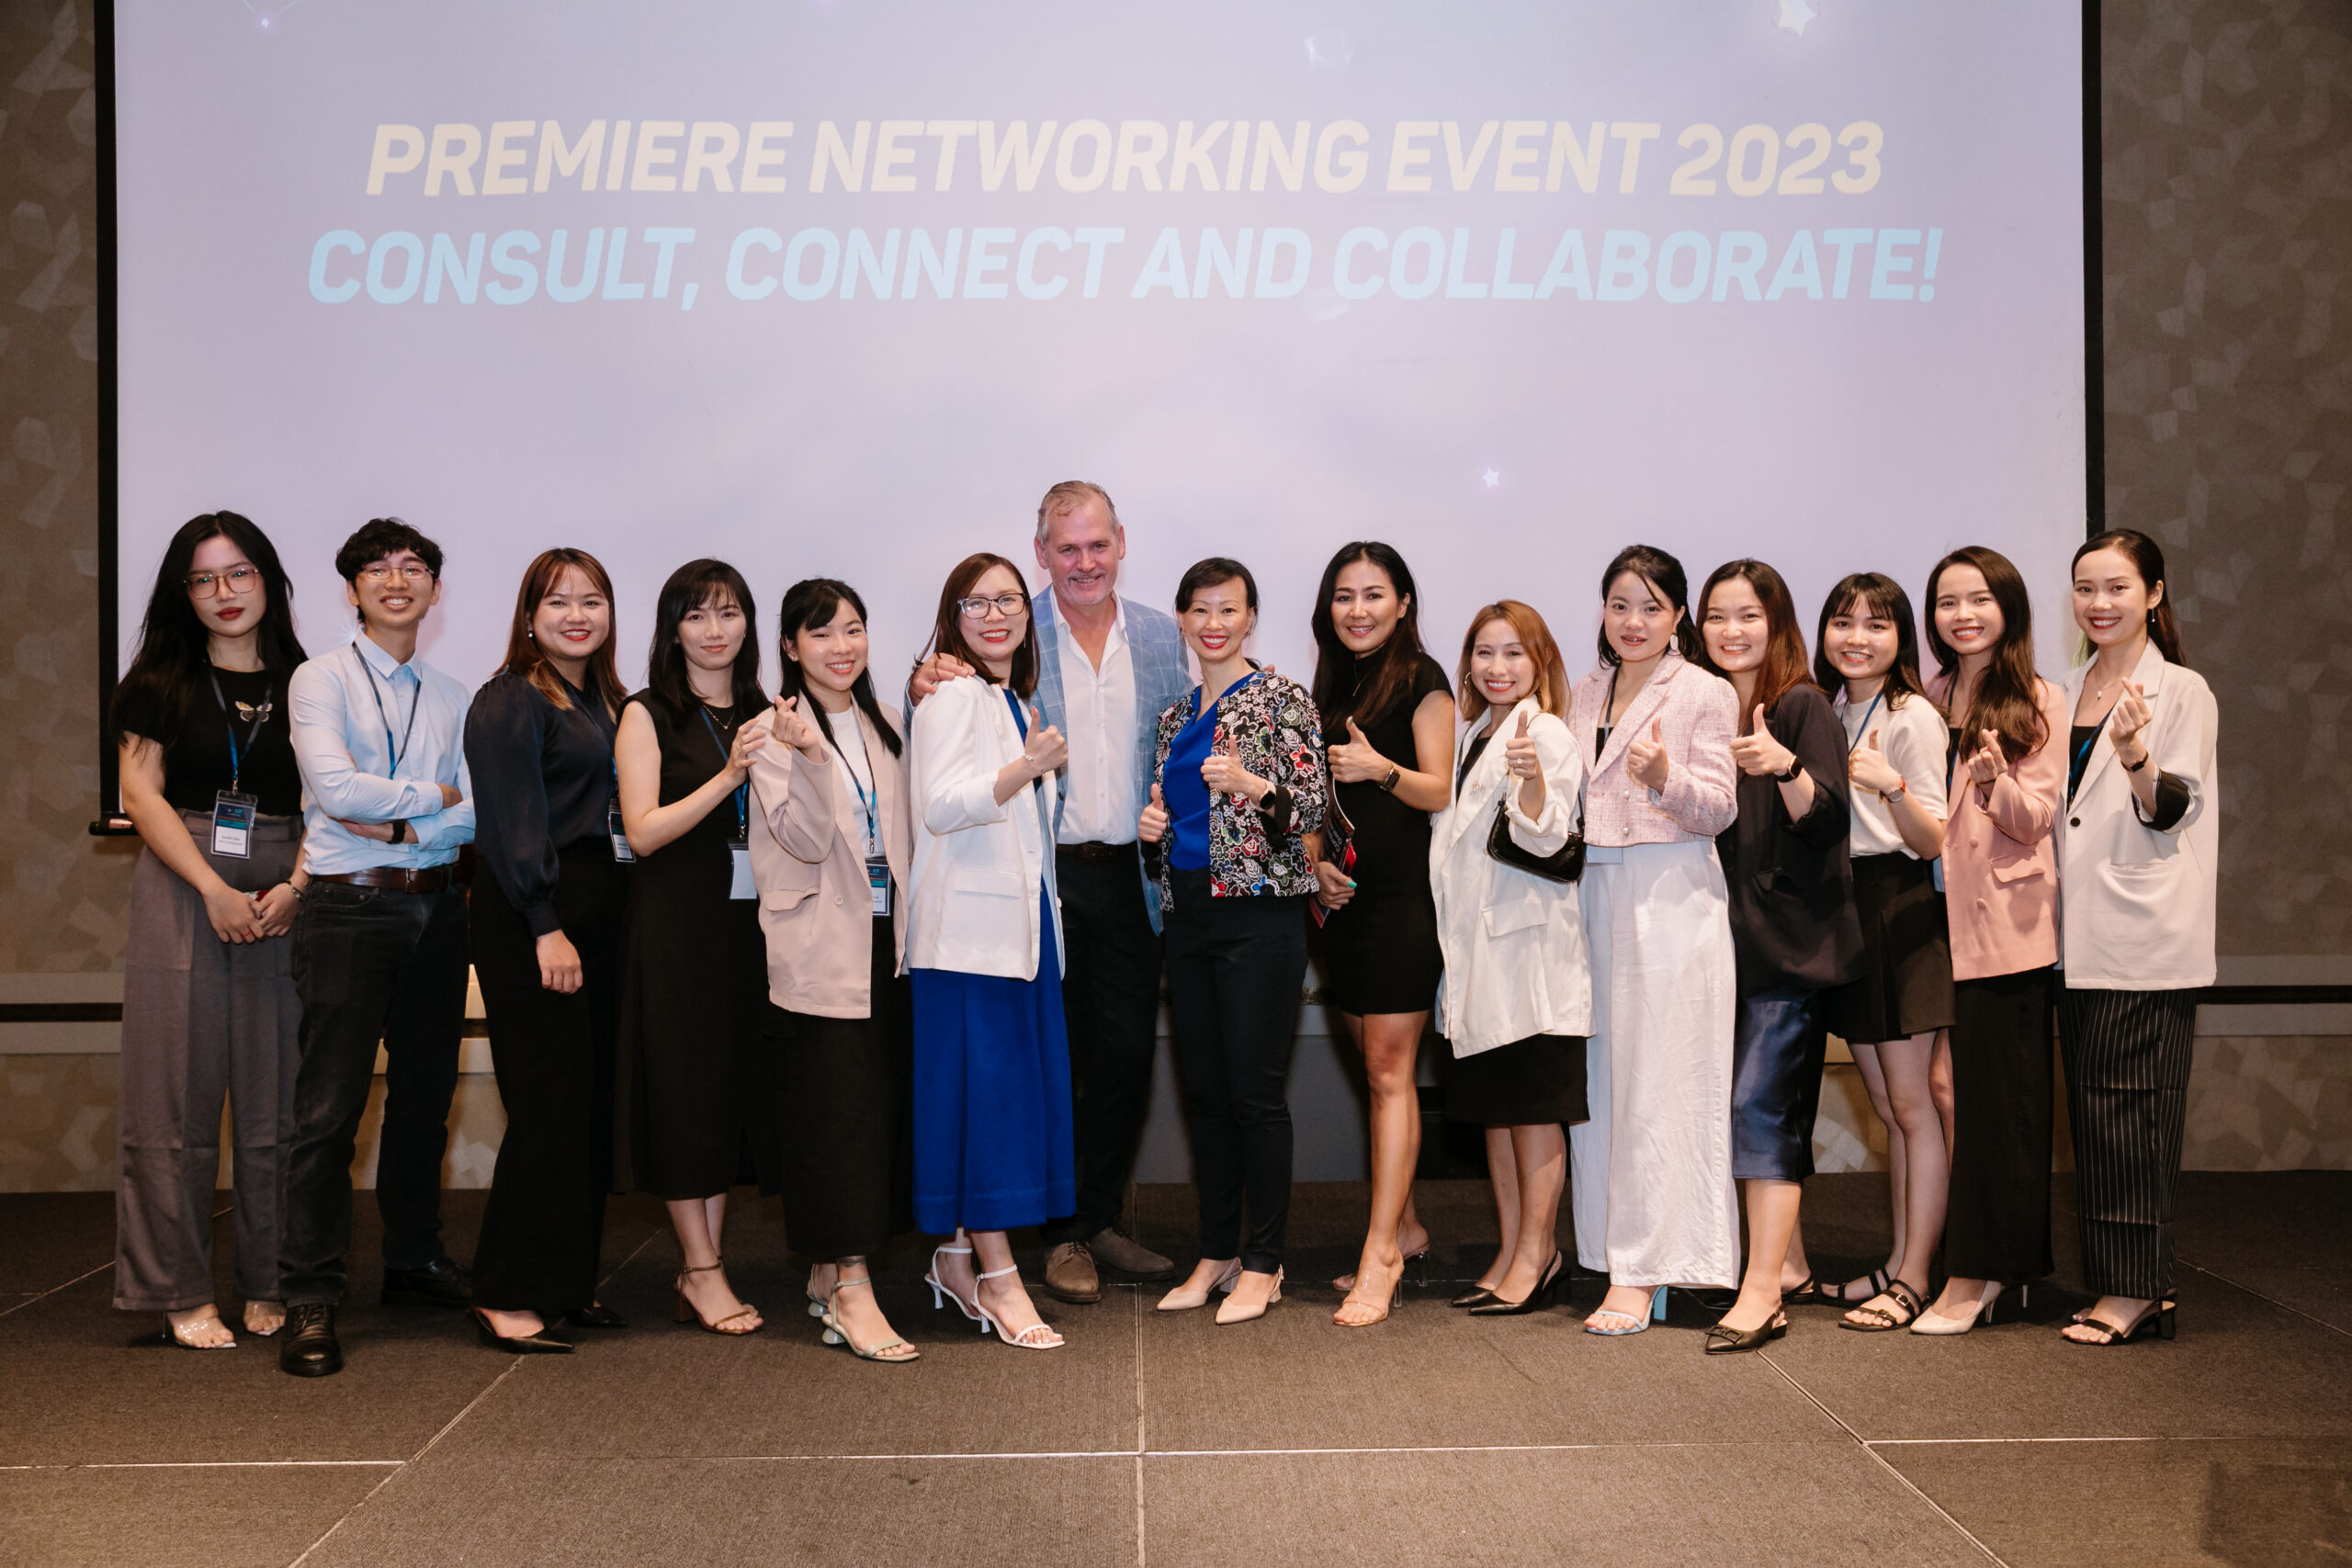 ASW Consulting’s Premiere Networking Event